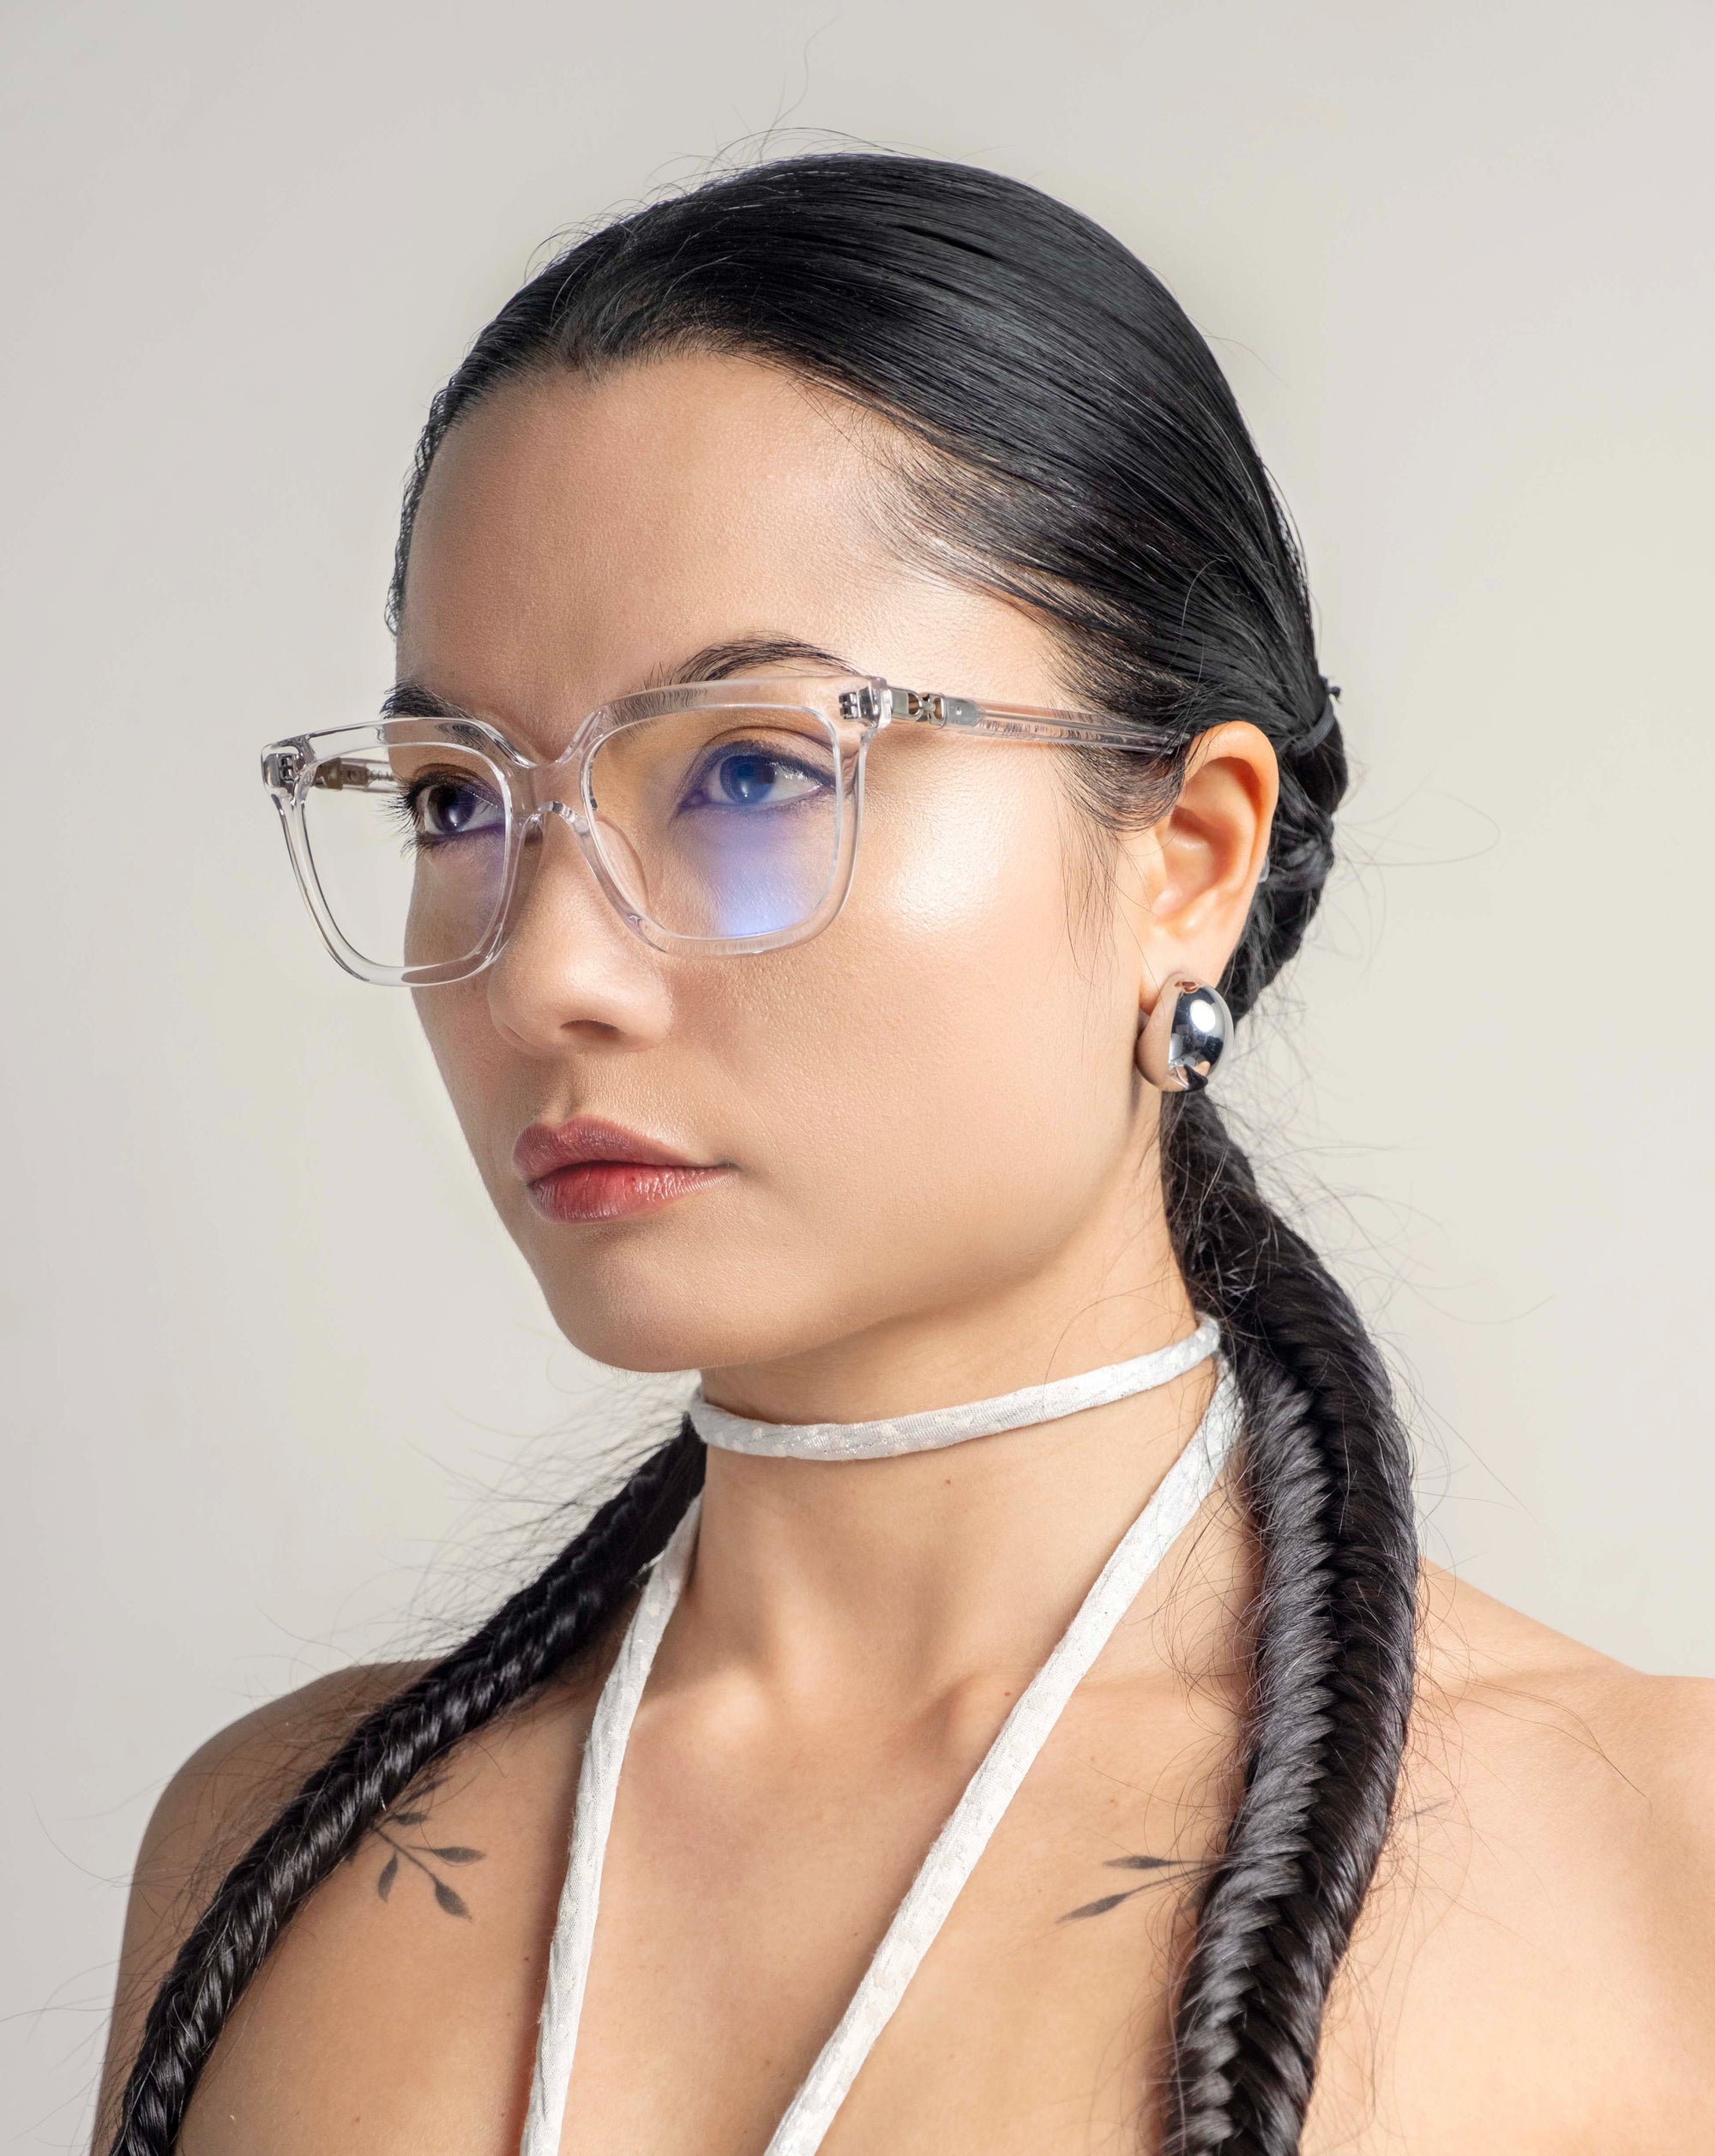 A person with long, dark braided hair is wearing For Art&#39;s Sake® Nina glasses and a white choker. They have a serious expression and are dressed in a light-colored top. The classic square silhouette of the glasses adds to their poised look, set against a plain, neutral background.